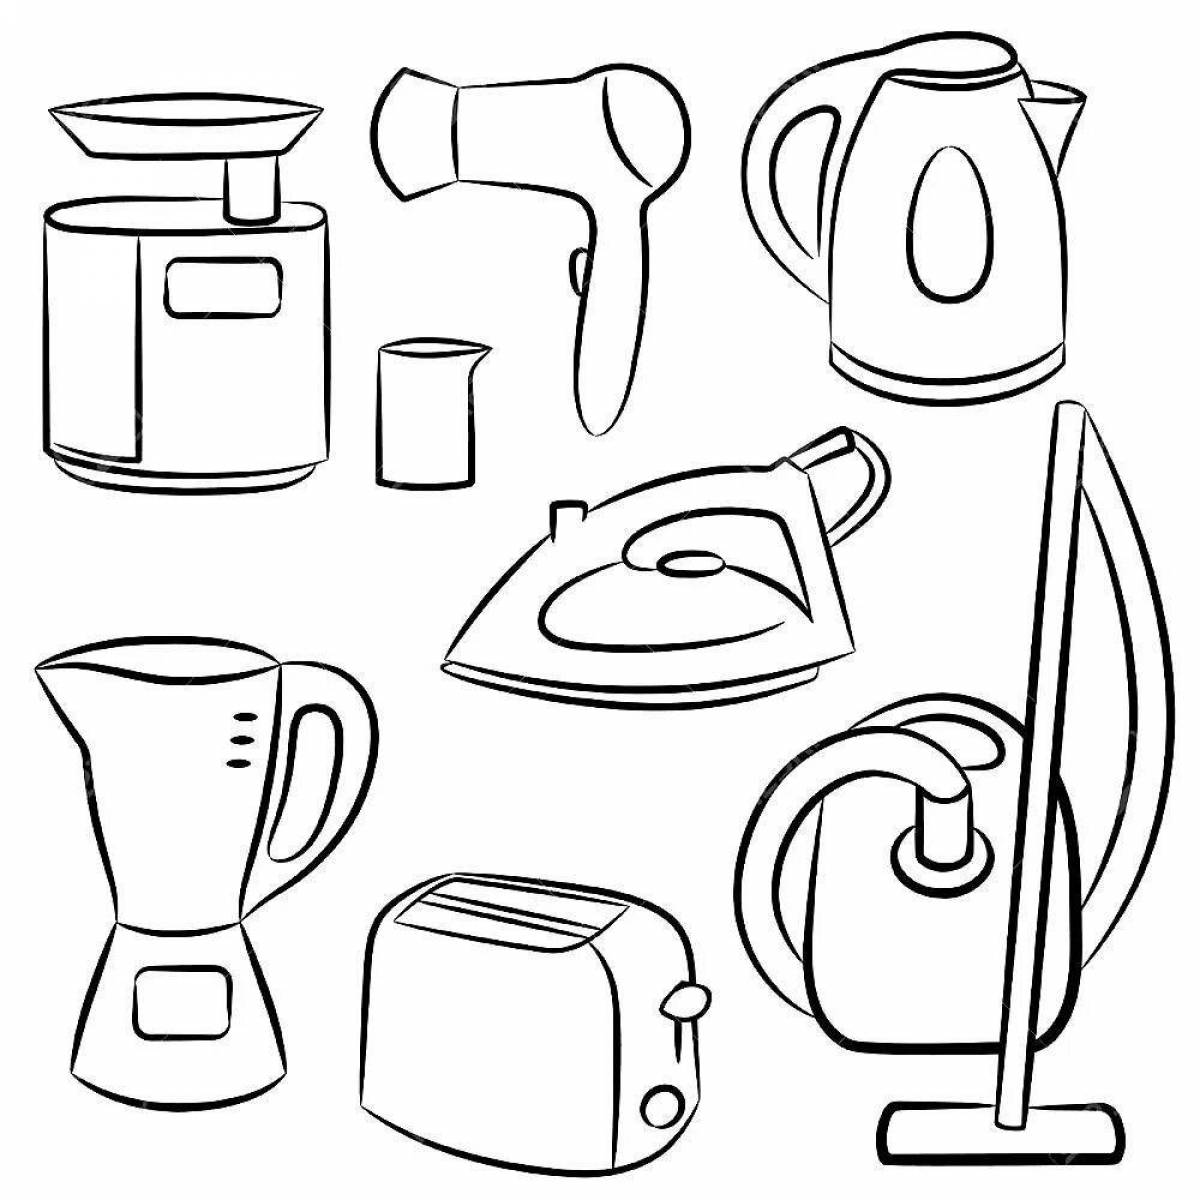 Colorful electrical appliances coloring pages for kids